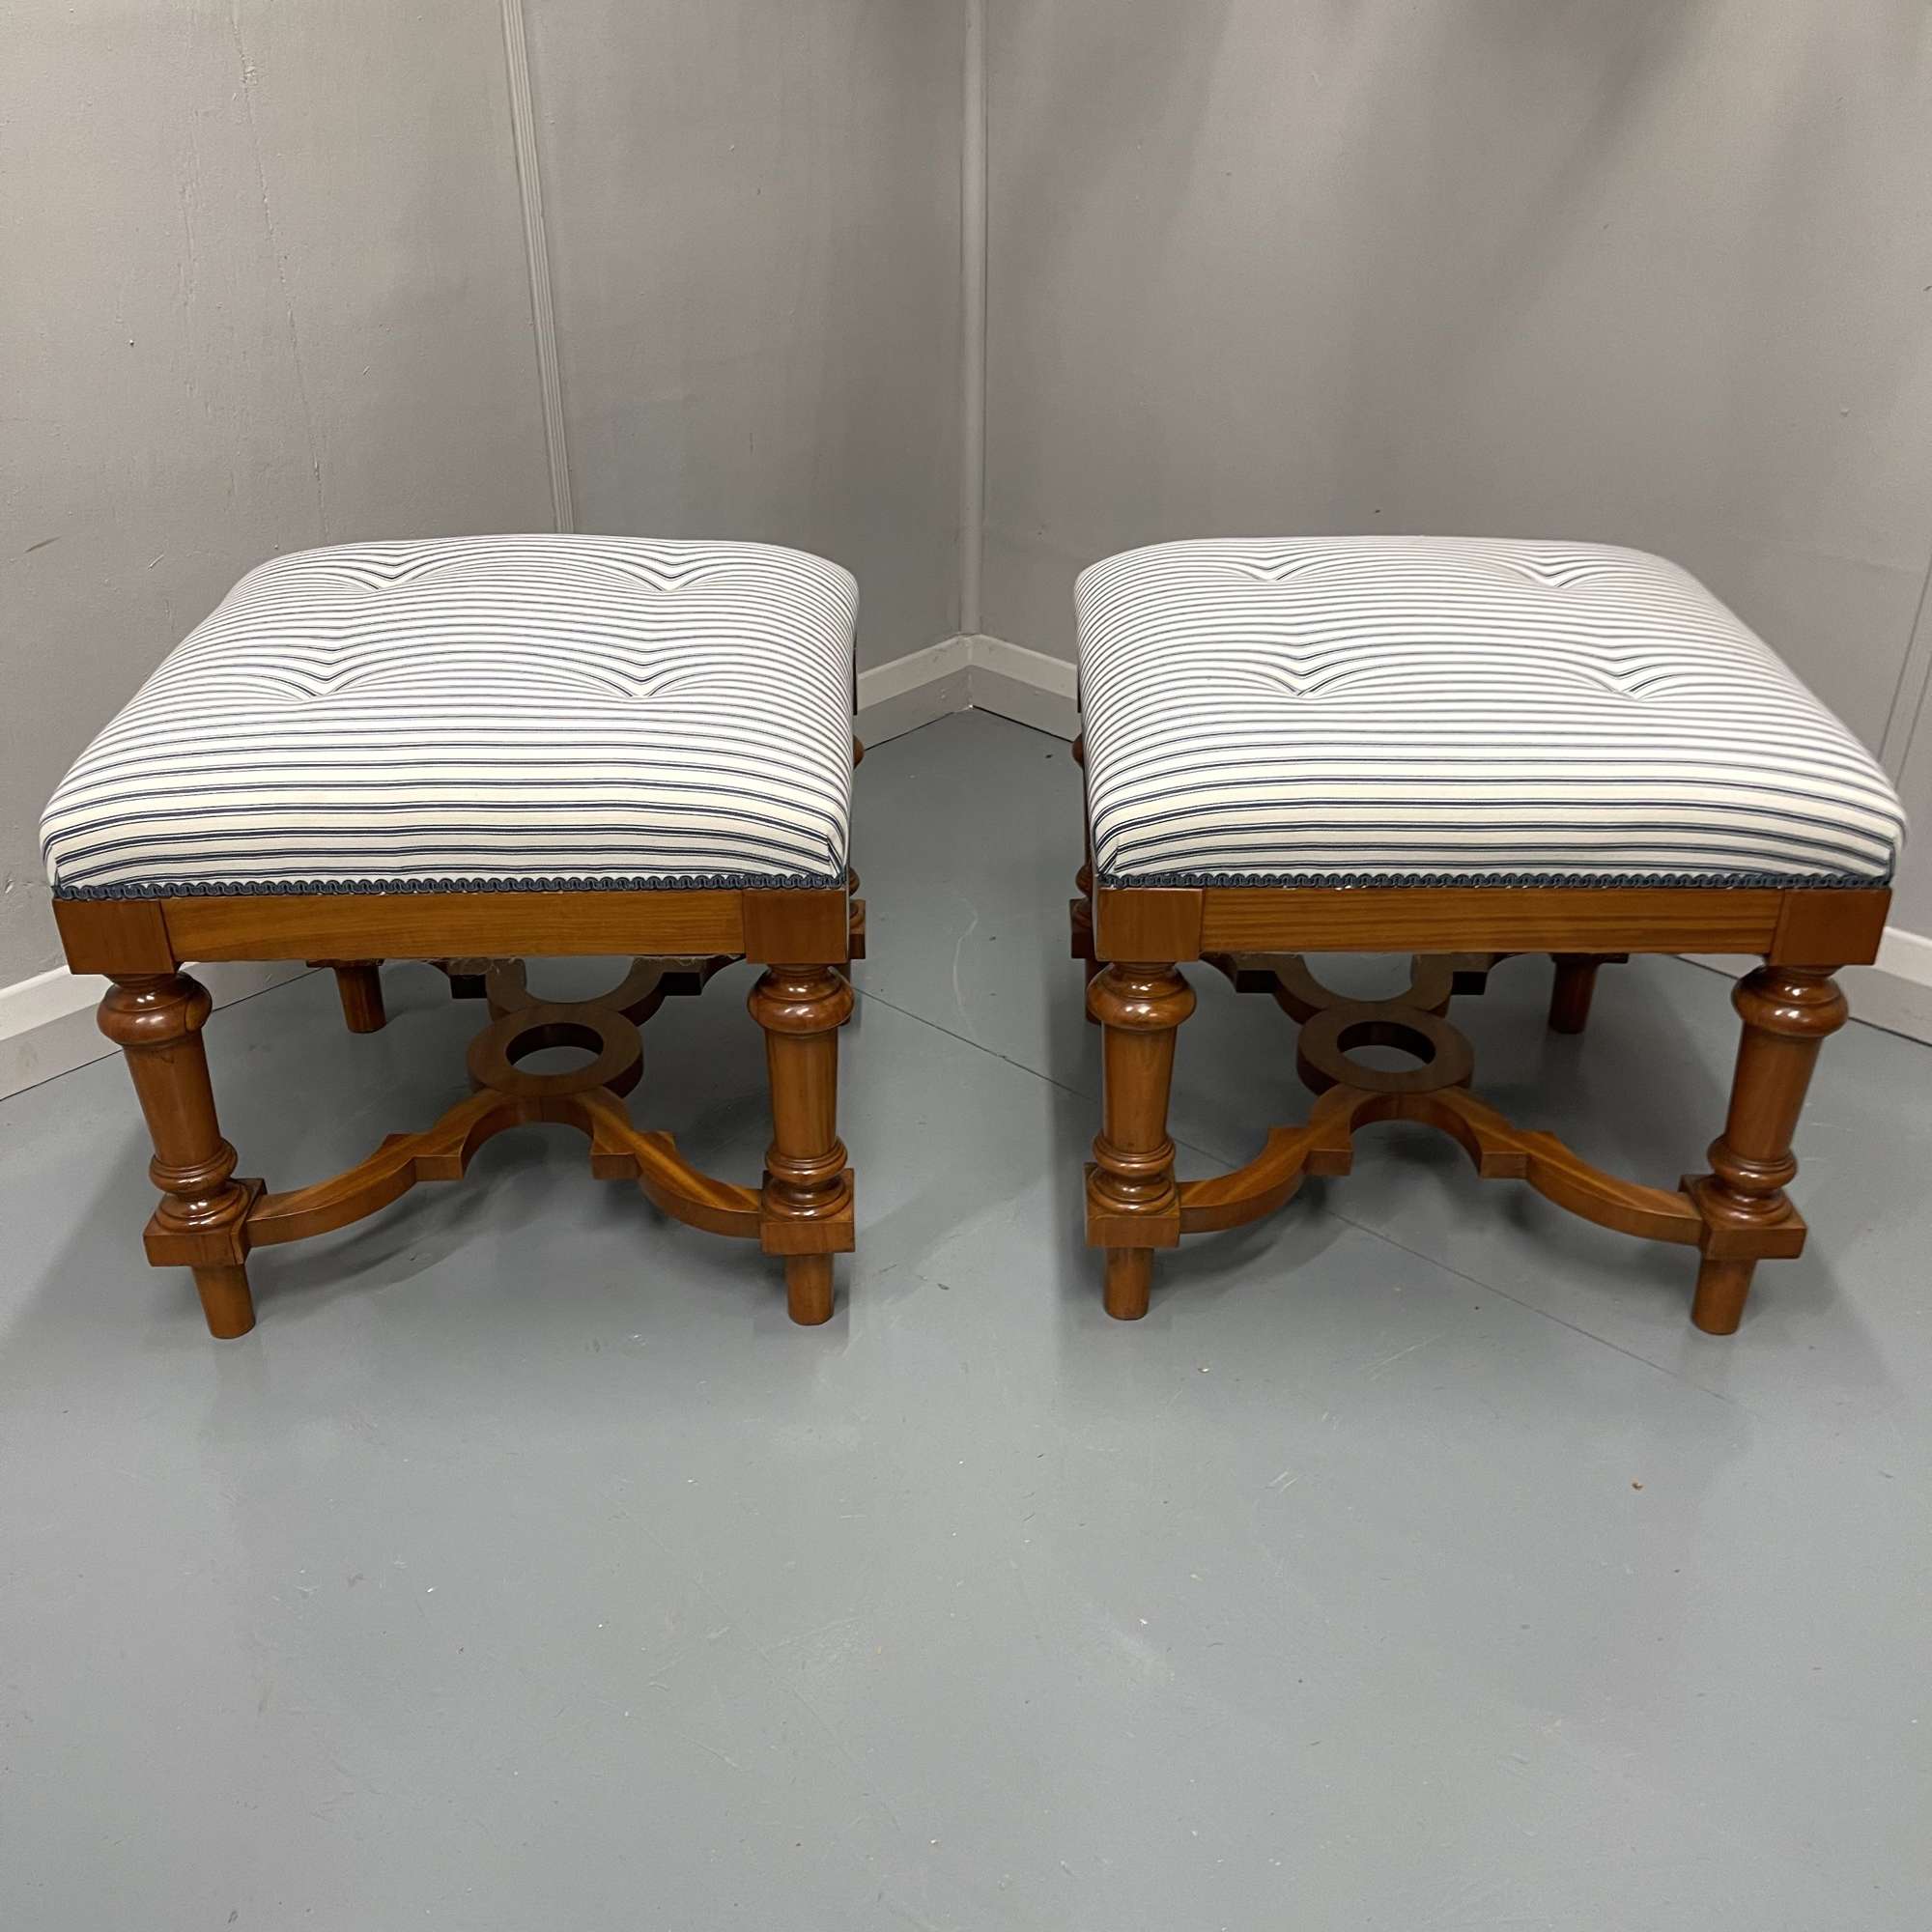 Pair Of Buttoned Ticking Stripe Satinwood Stools